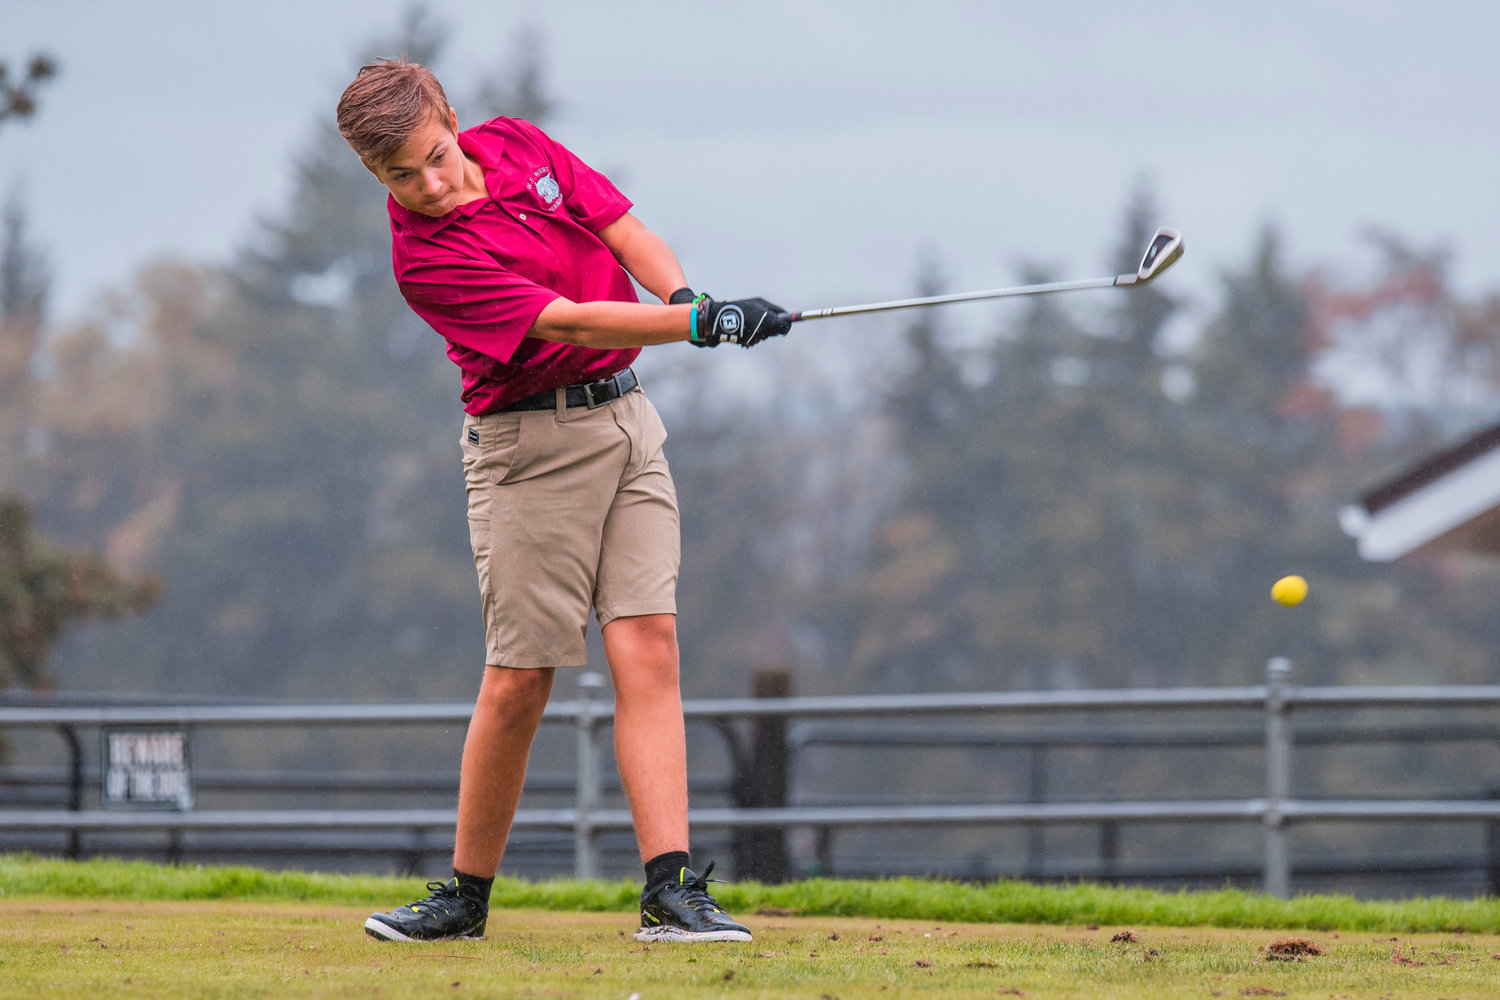 W.F. West’s Keplin Trana tees off Wednesday afternoon at the Newaukum Valley Golf Course in Chehalis.